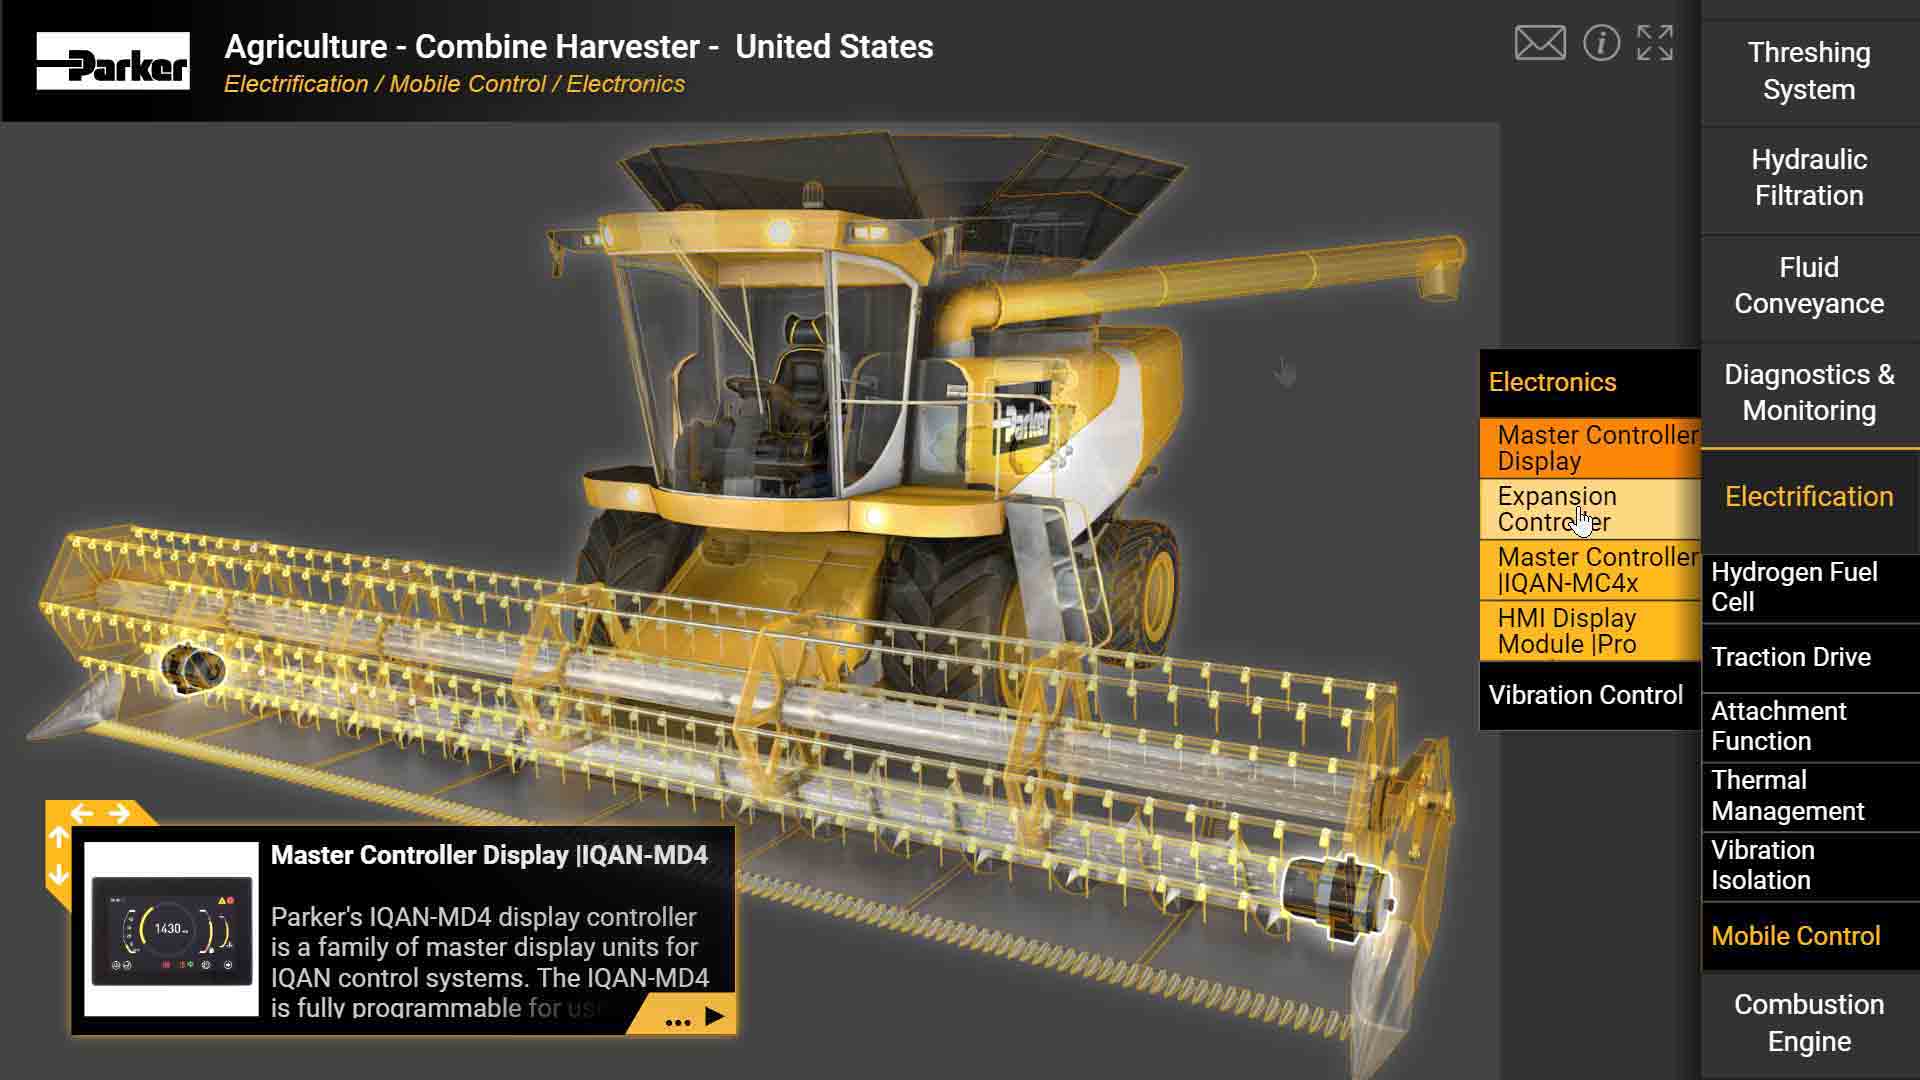 Agriculture Combine Harvester Equipment and Products